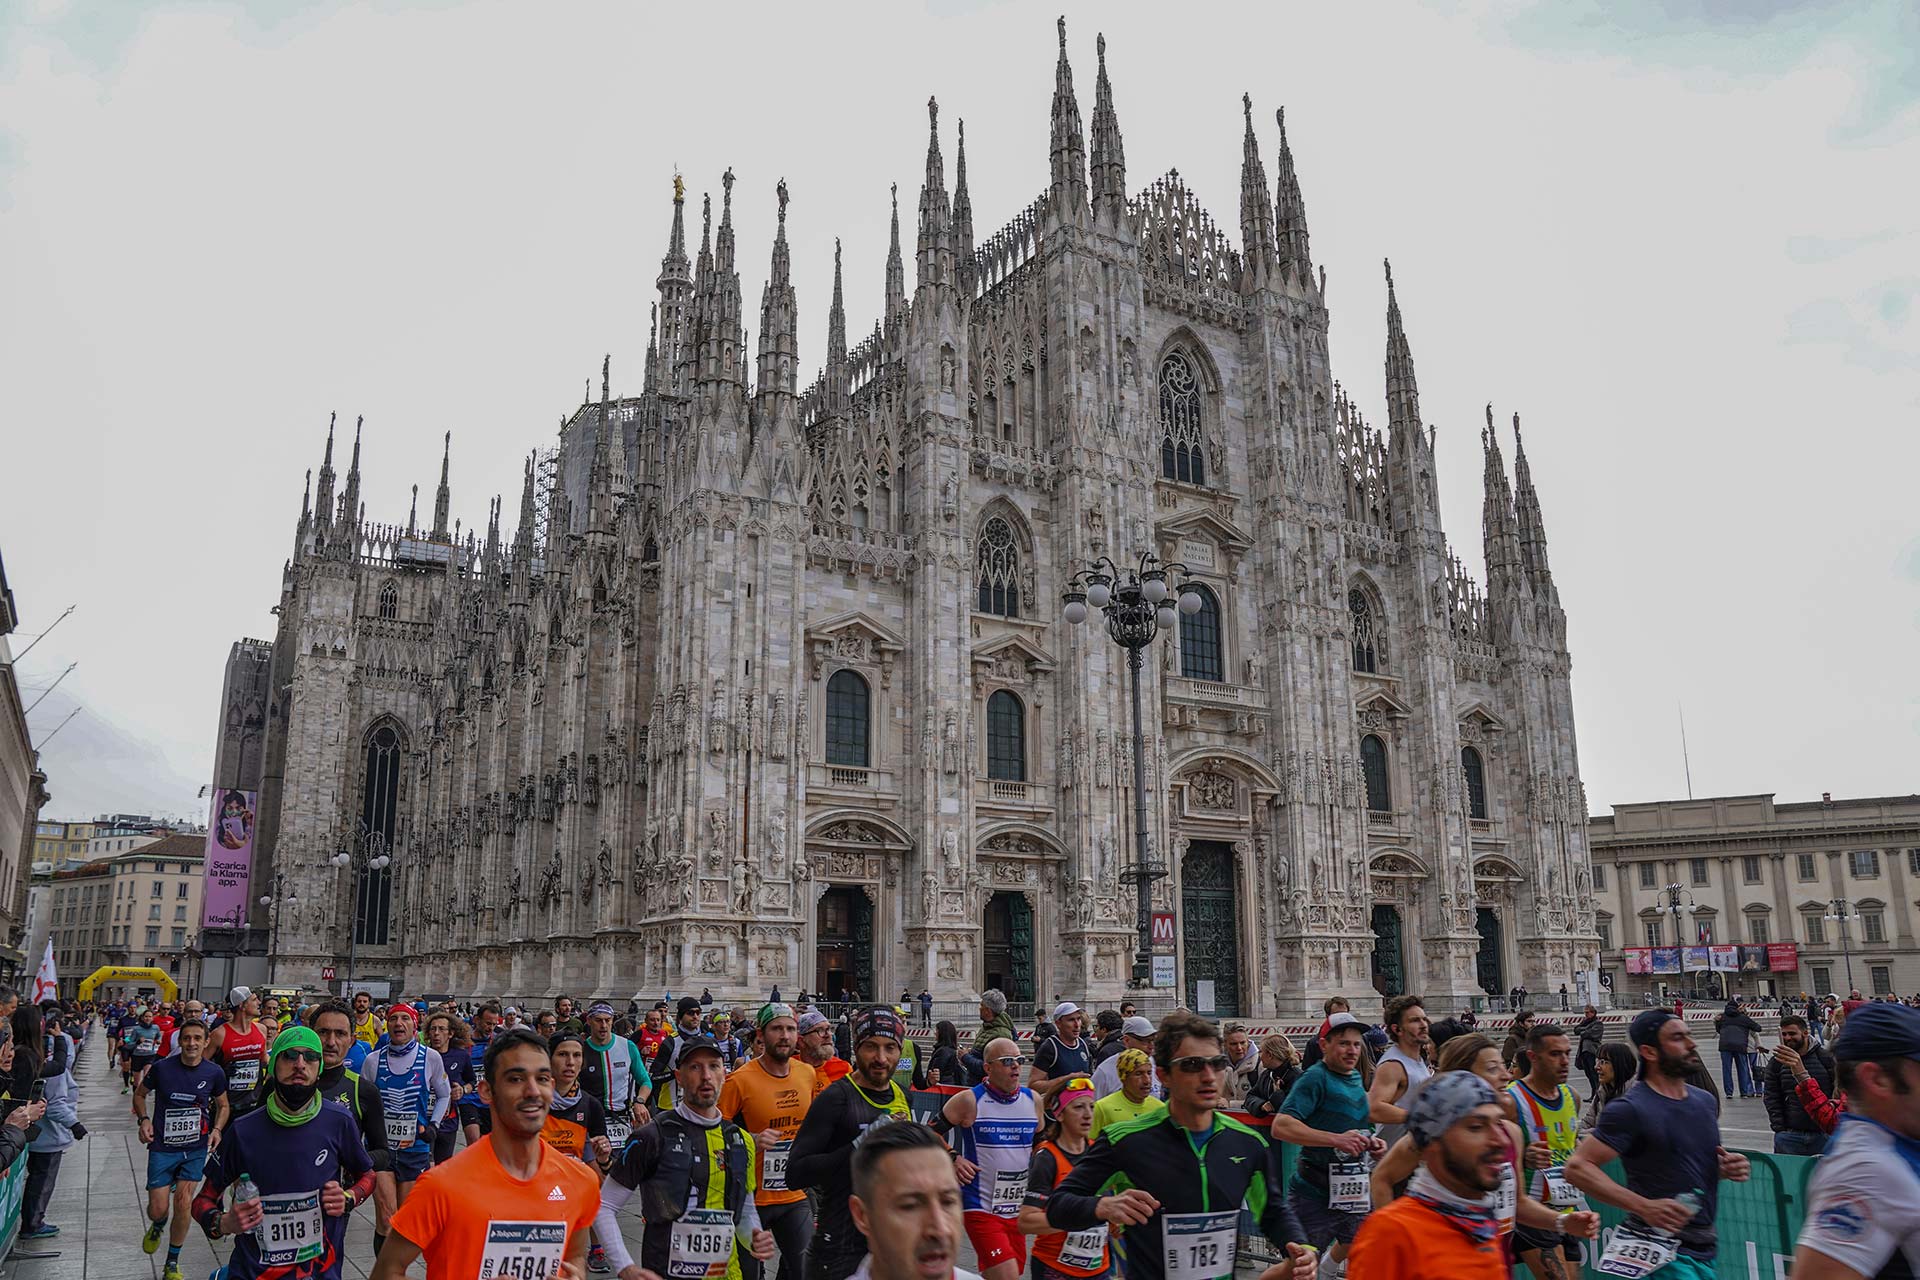 22nd edition route changes: start and finish at the duomo